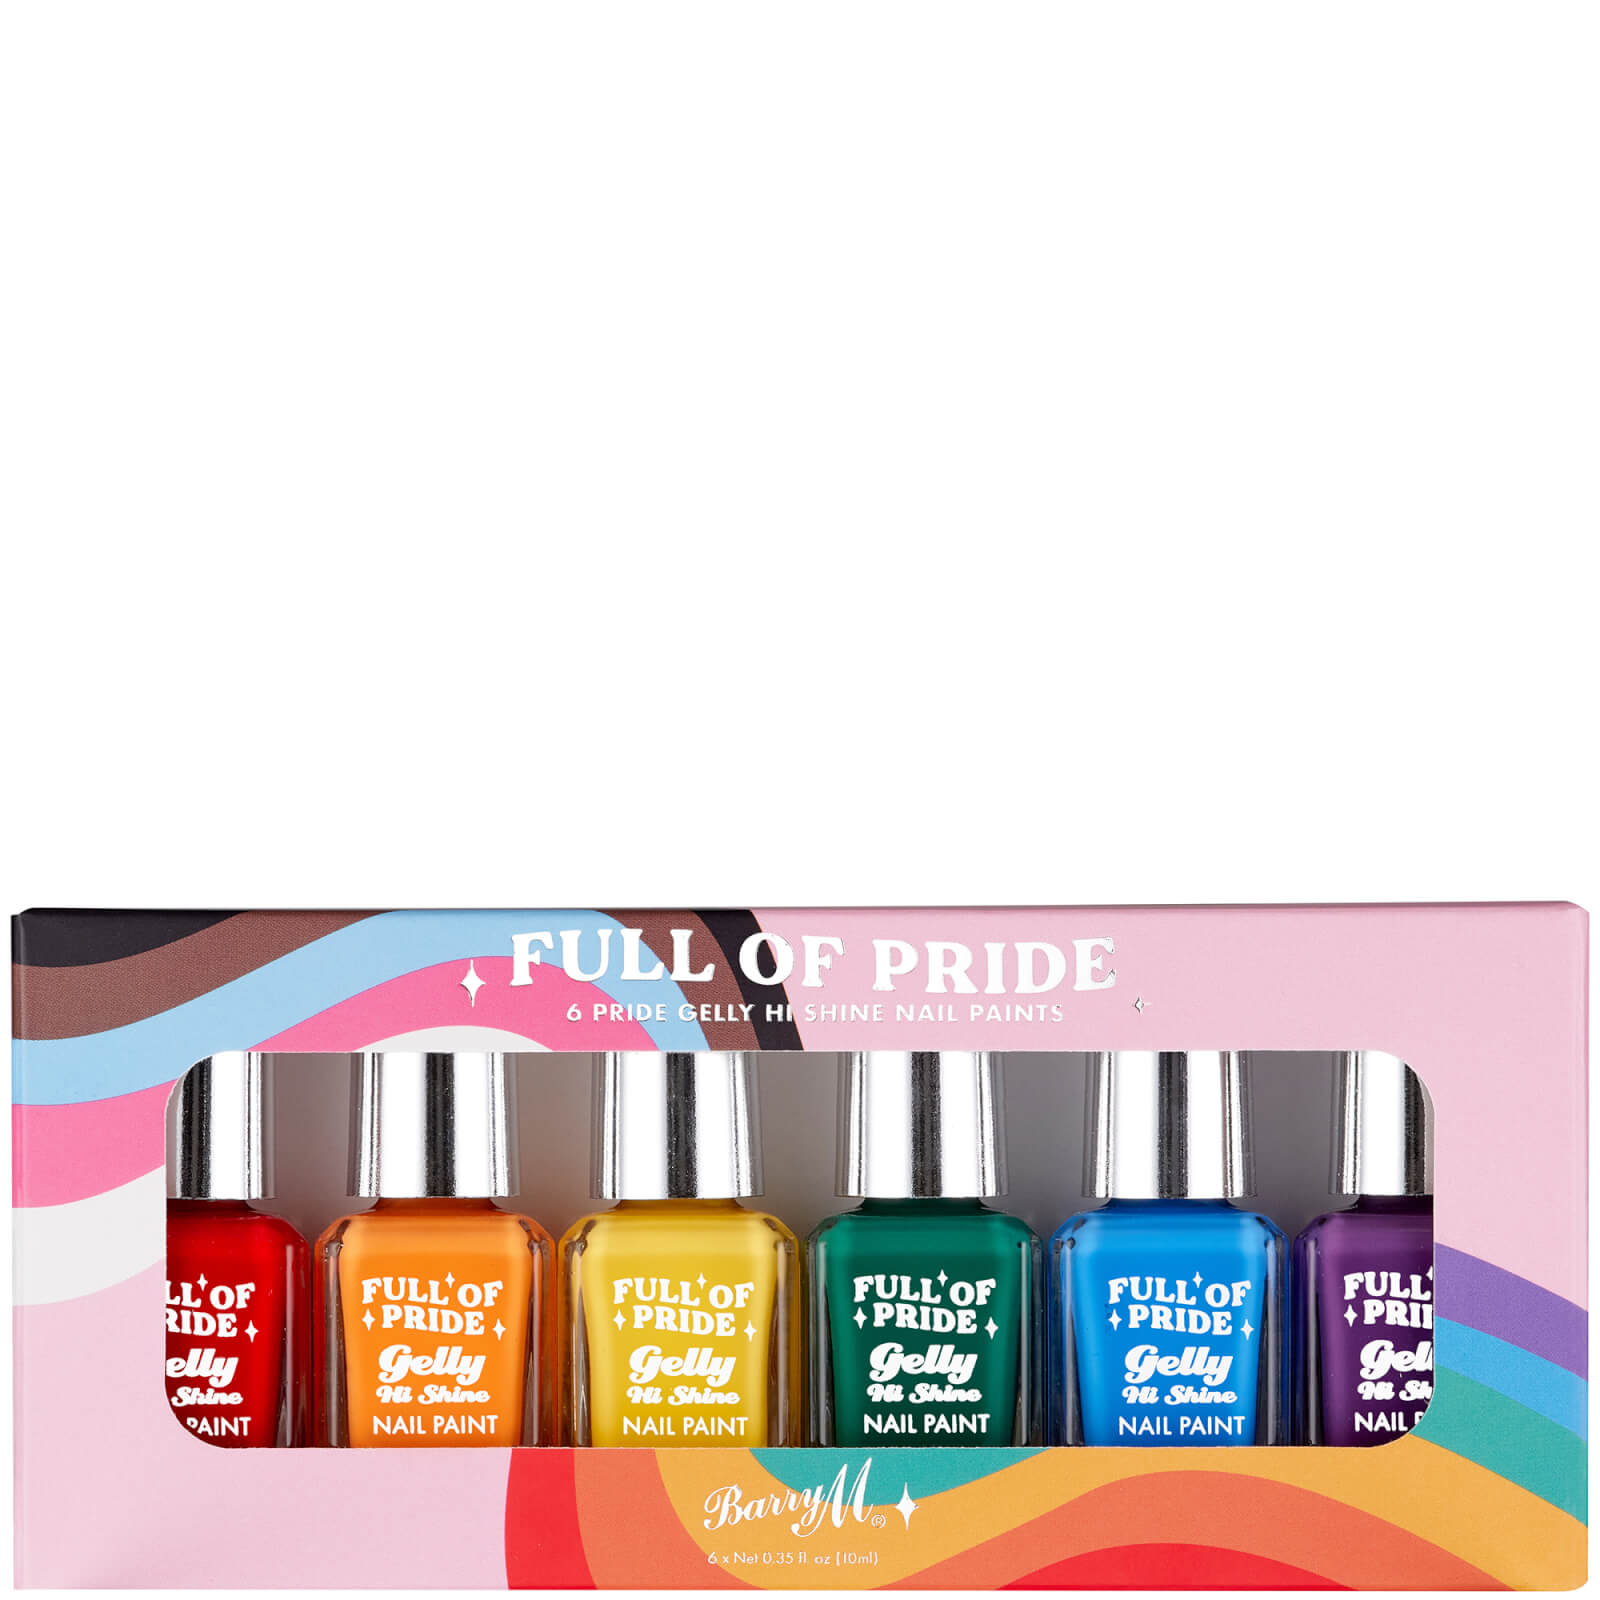 Barry M Cosmetics Full of Pride Nail Paint Gift Set